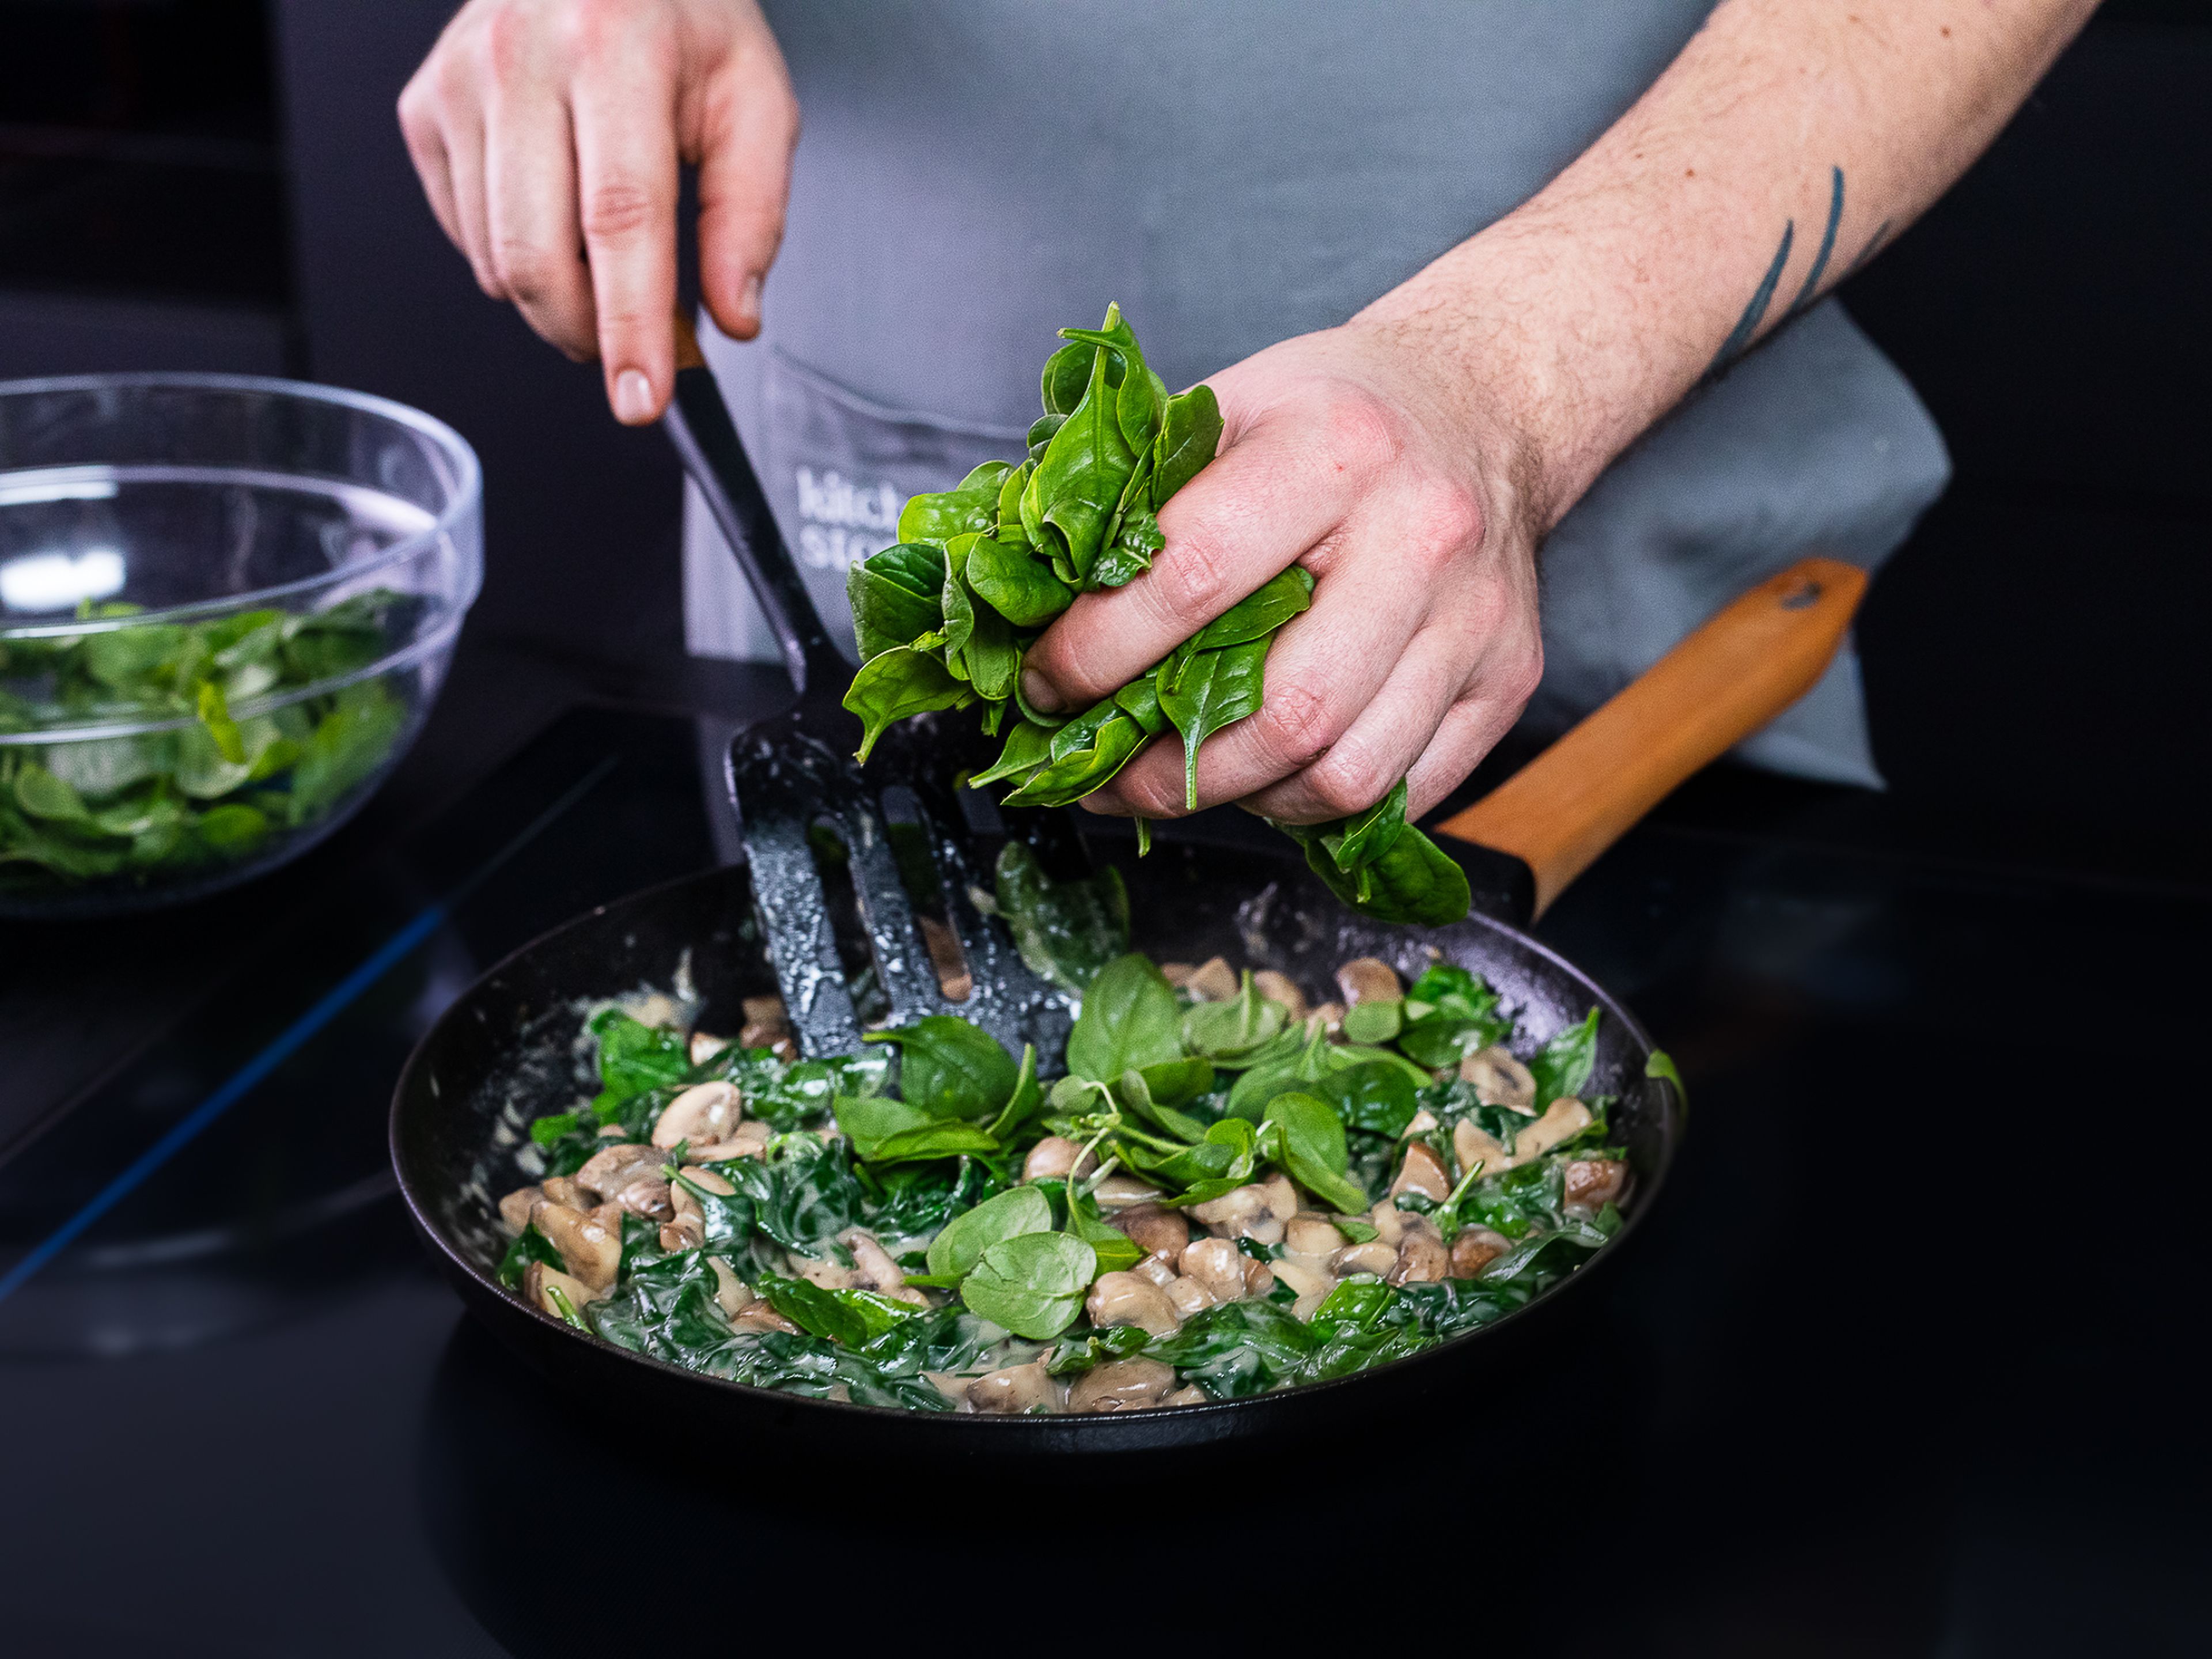 Add milk to the pan and stir until it thickens into a creamy sauce. Season with salt, pepper, and freshly grated nutmeg.  Add spinach in batches. When spinach is just barely wilted, stir in chopped parsley, and finish with lemon juice.